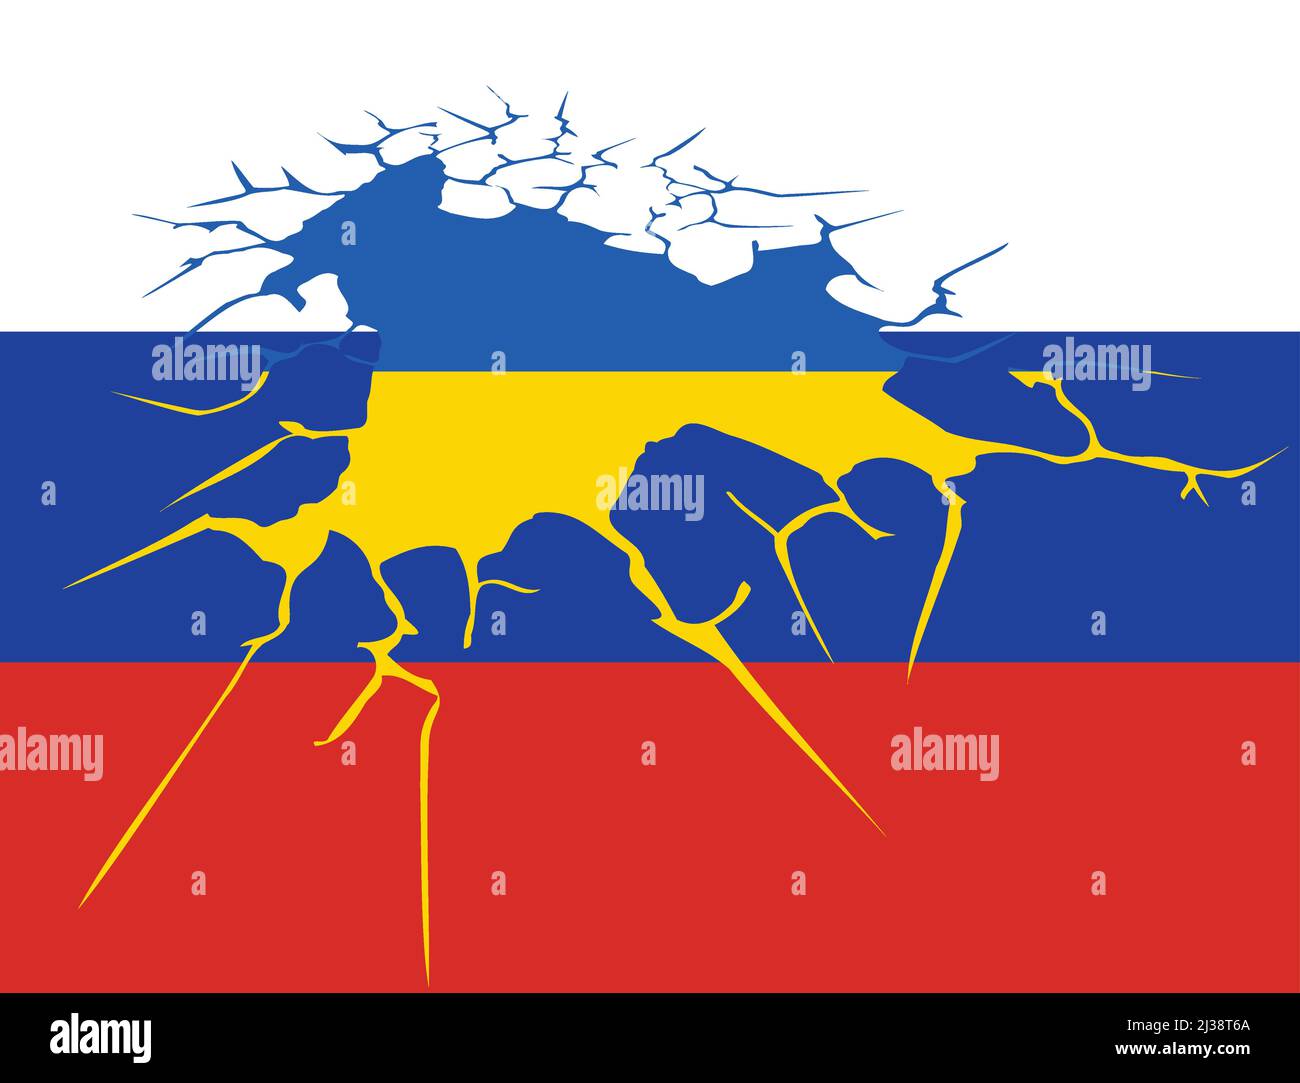 Damaged Russia with Ukraine flags Stock Vector